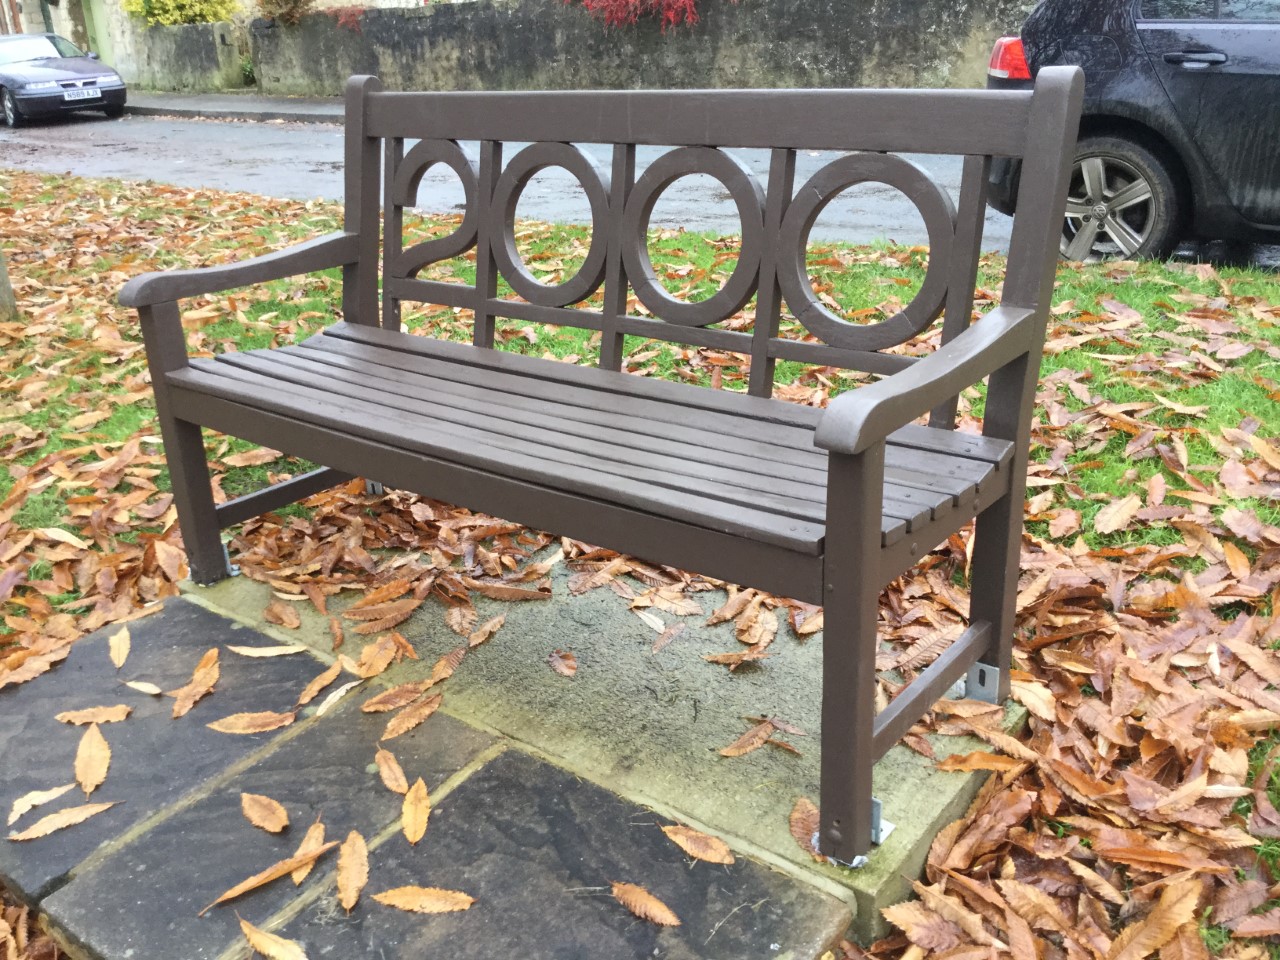 Councillor Garnett has finished renovating the two millennium benches in the village centre in preparation of the 20th anniversary.  The remaining benches along the beck will be repainted over the next few months.